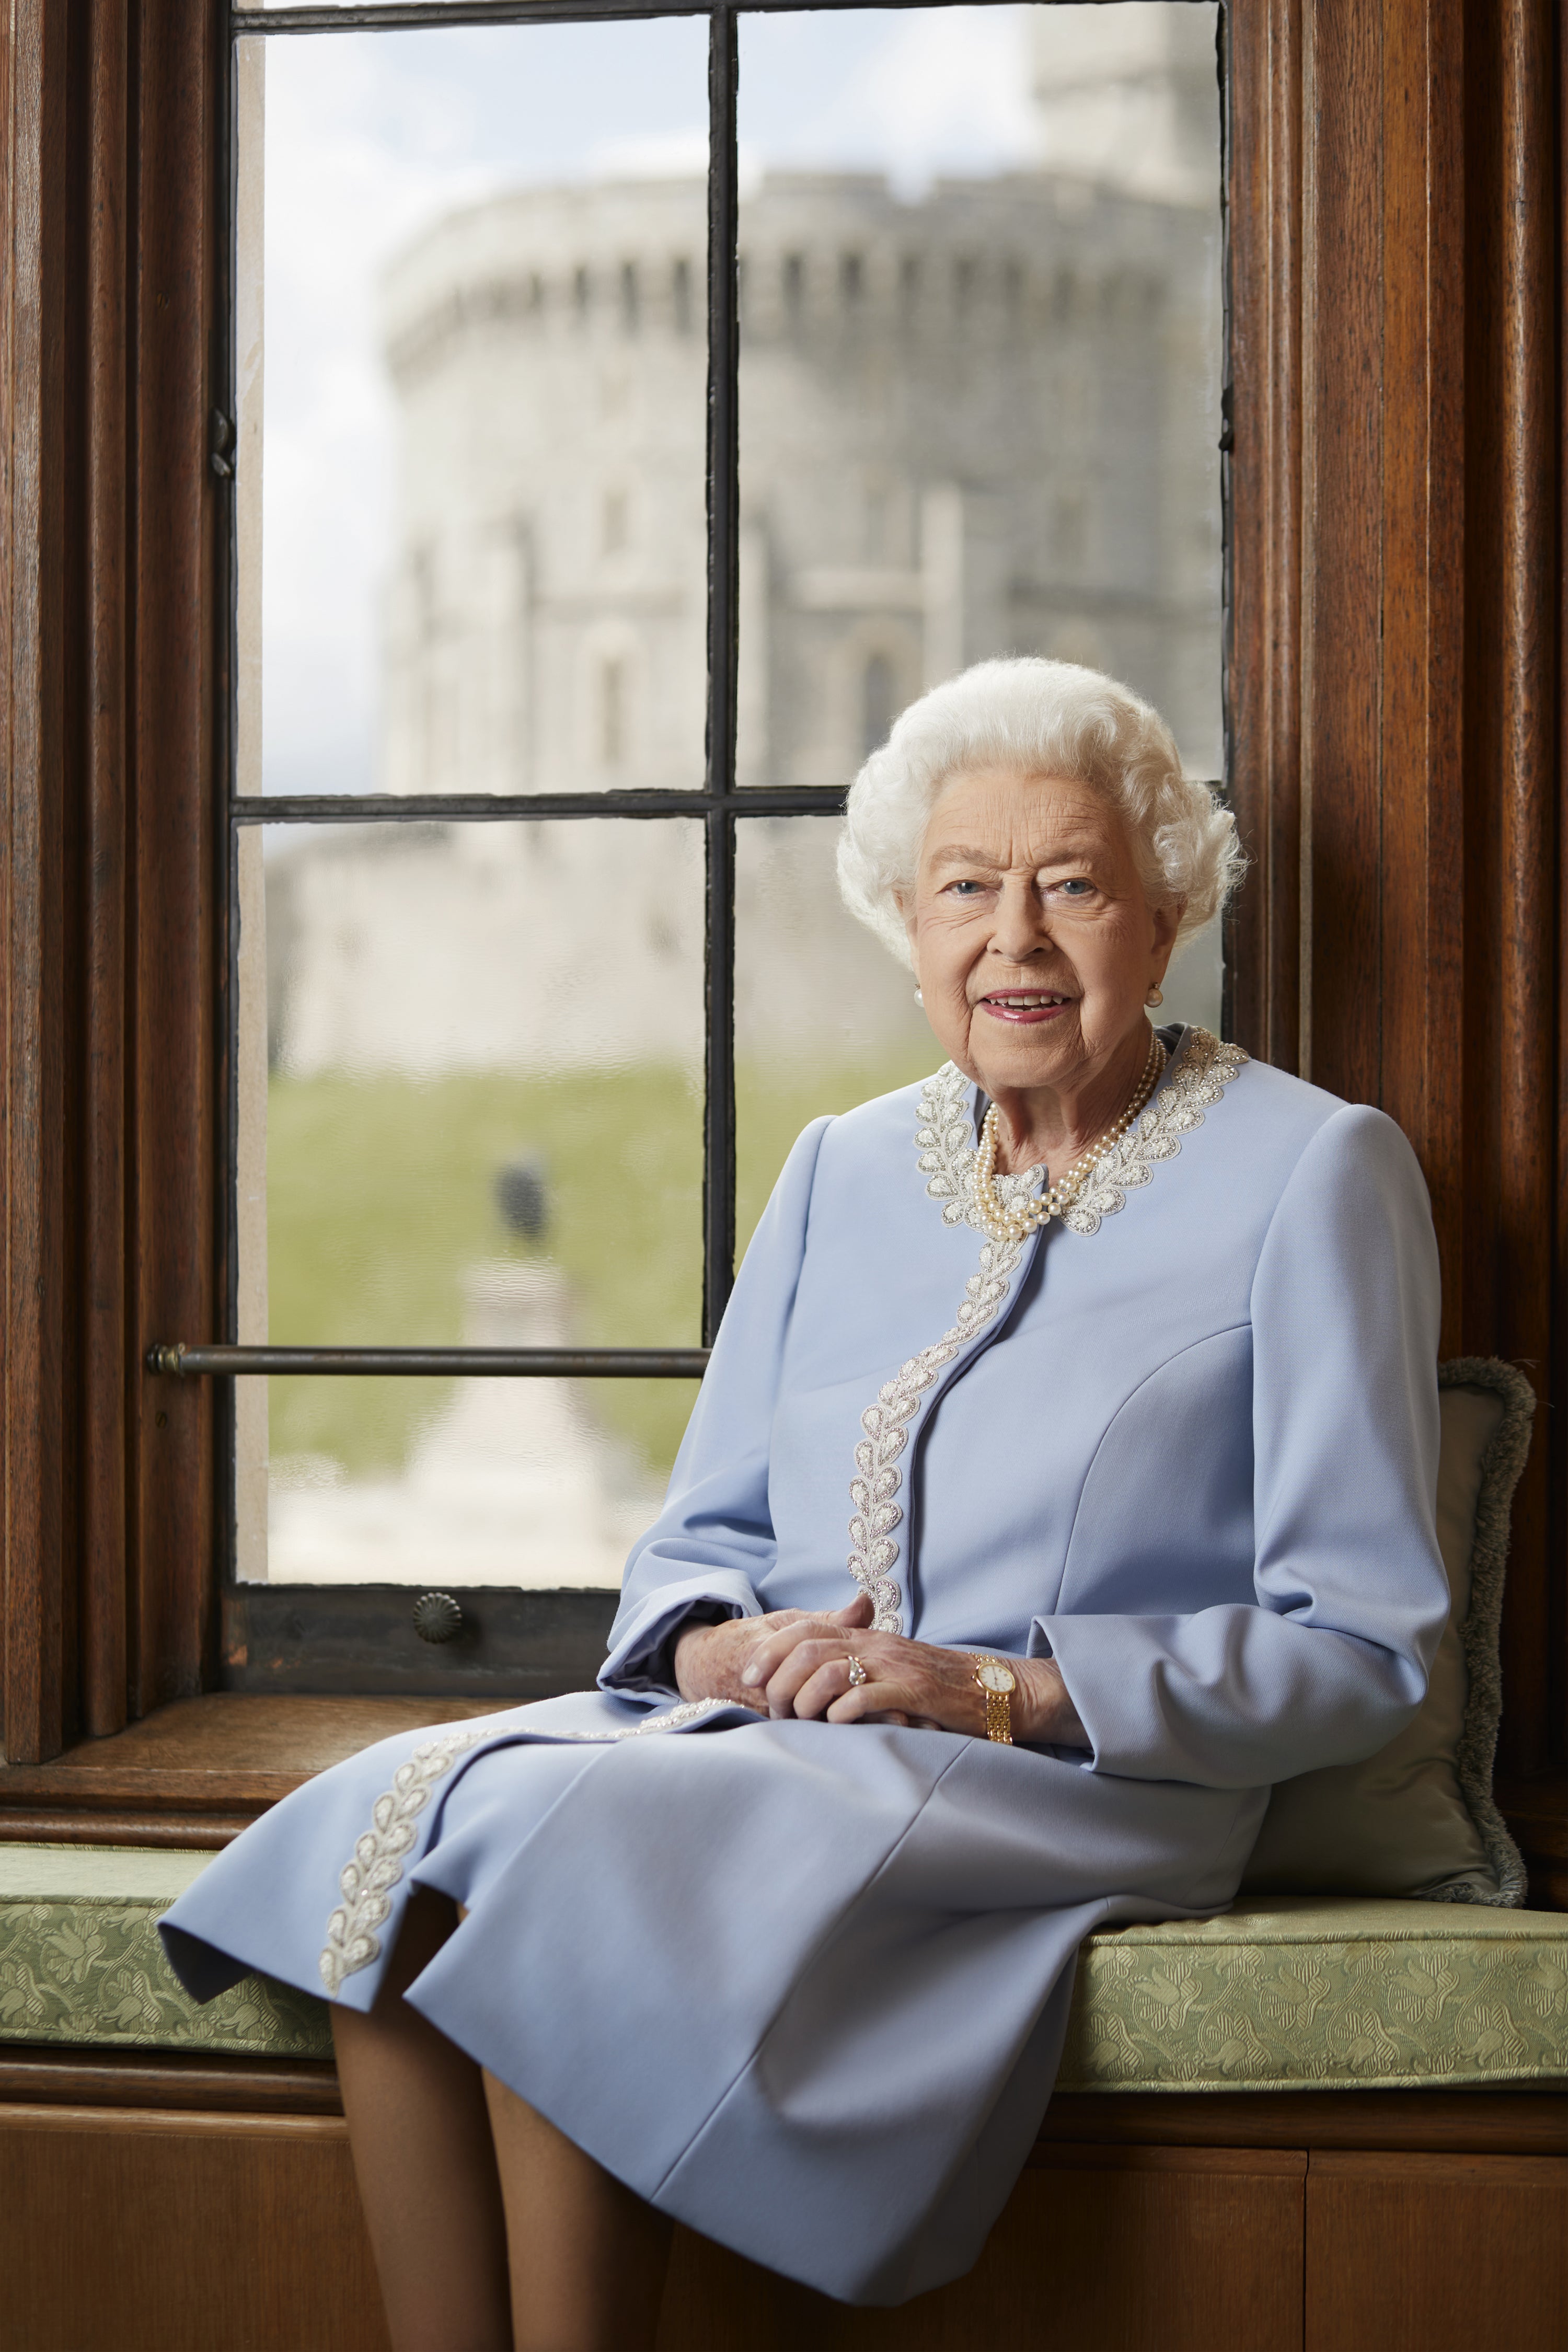 The official Platinum Jubilee portrait of The Queen at Windsor Castle (Royal Household/Ranald Mackechnie/PA)